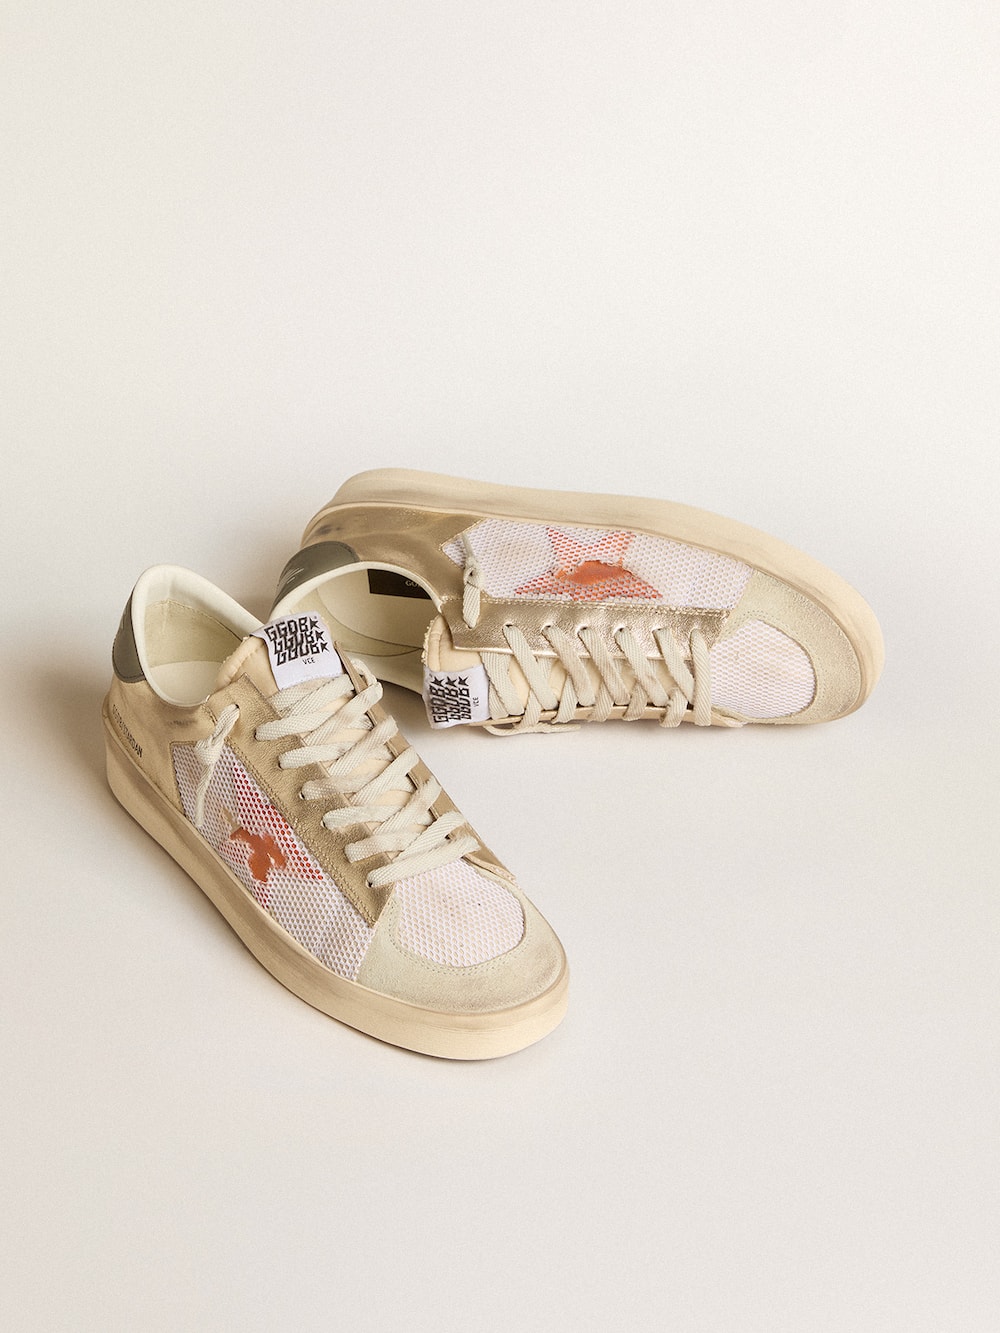 Golden Goose - Stardan in white mesh with orange star and platinum leather inserts in 